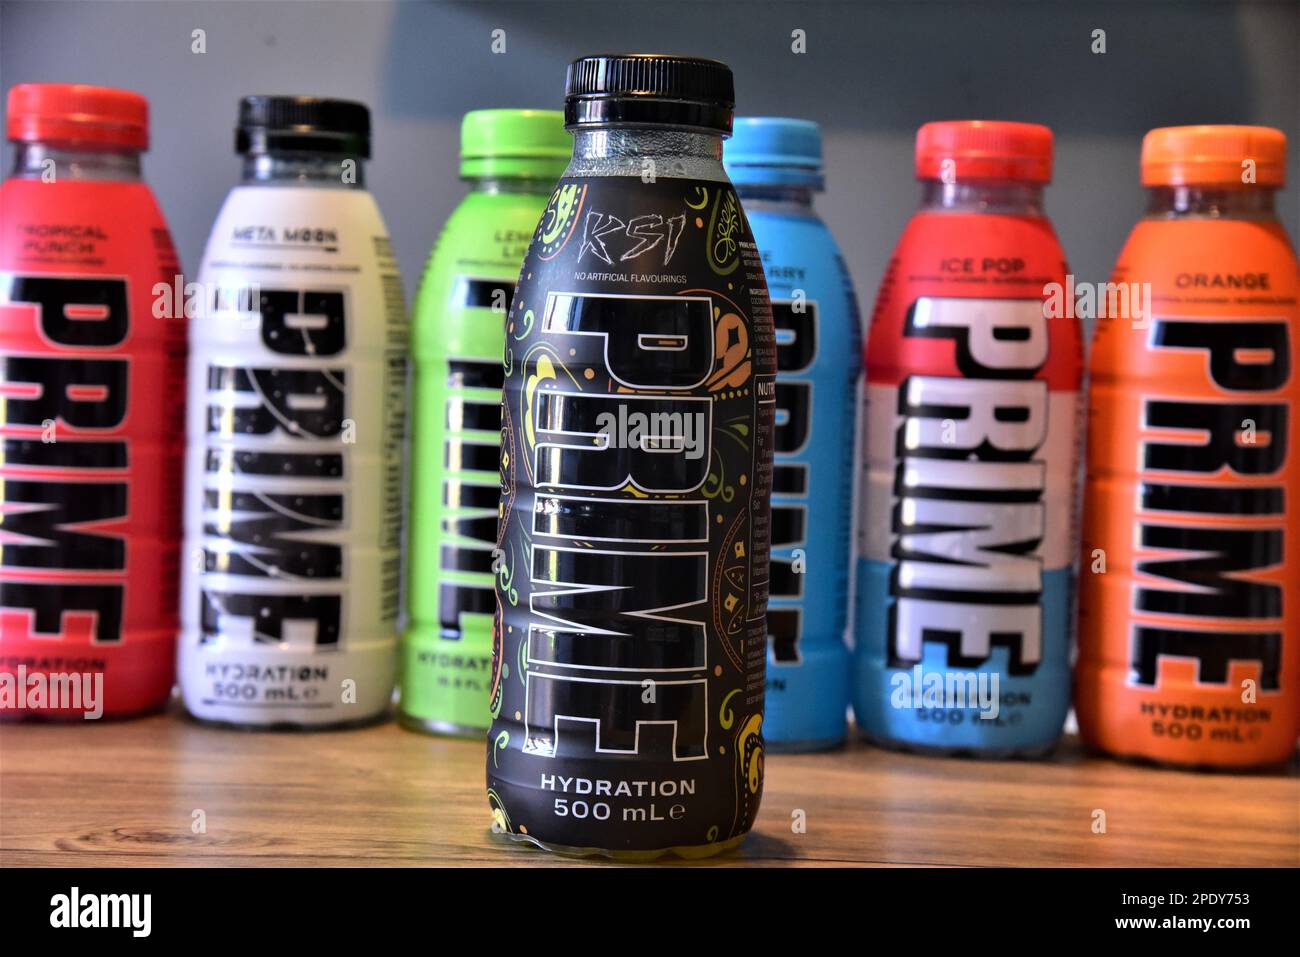 https://c8.alamy.com/comp/2PDY753/prime-hydration-drink-pictured-are-the-nine-flavours-including-ksi-limited-edition-the-drinks-are-made-by-youtubers-logan-paul-and-ksi-2PDY753.jpg